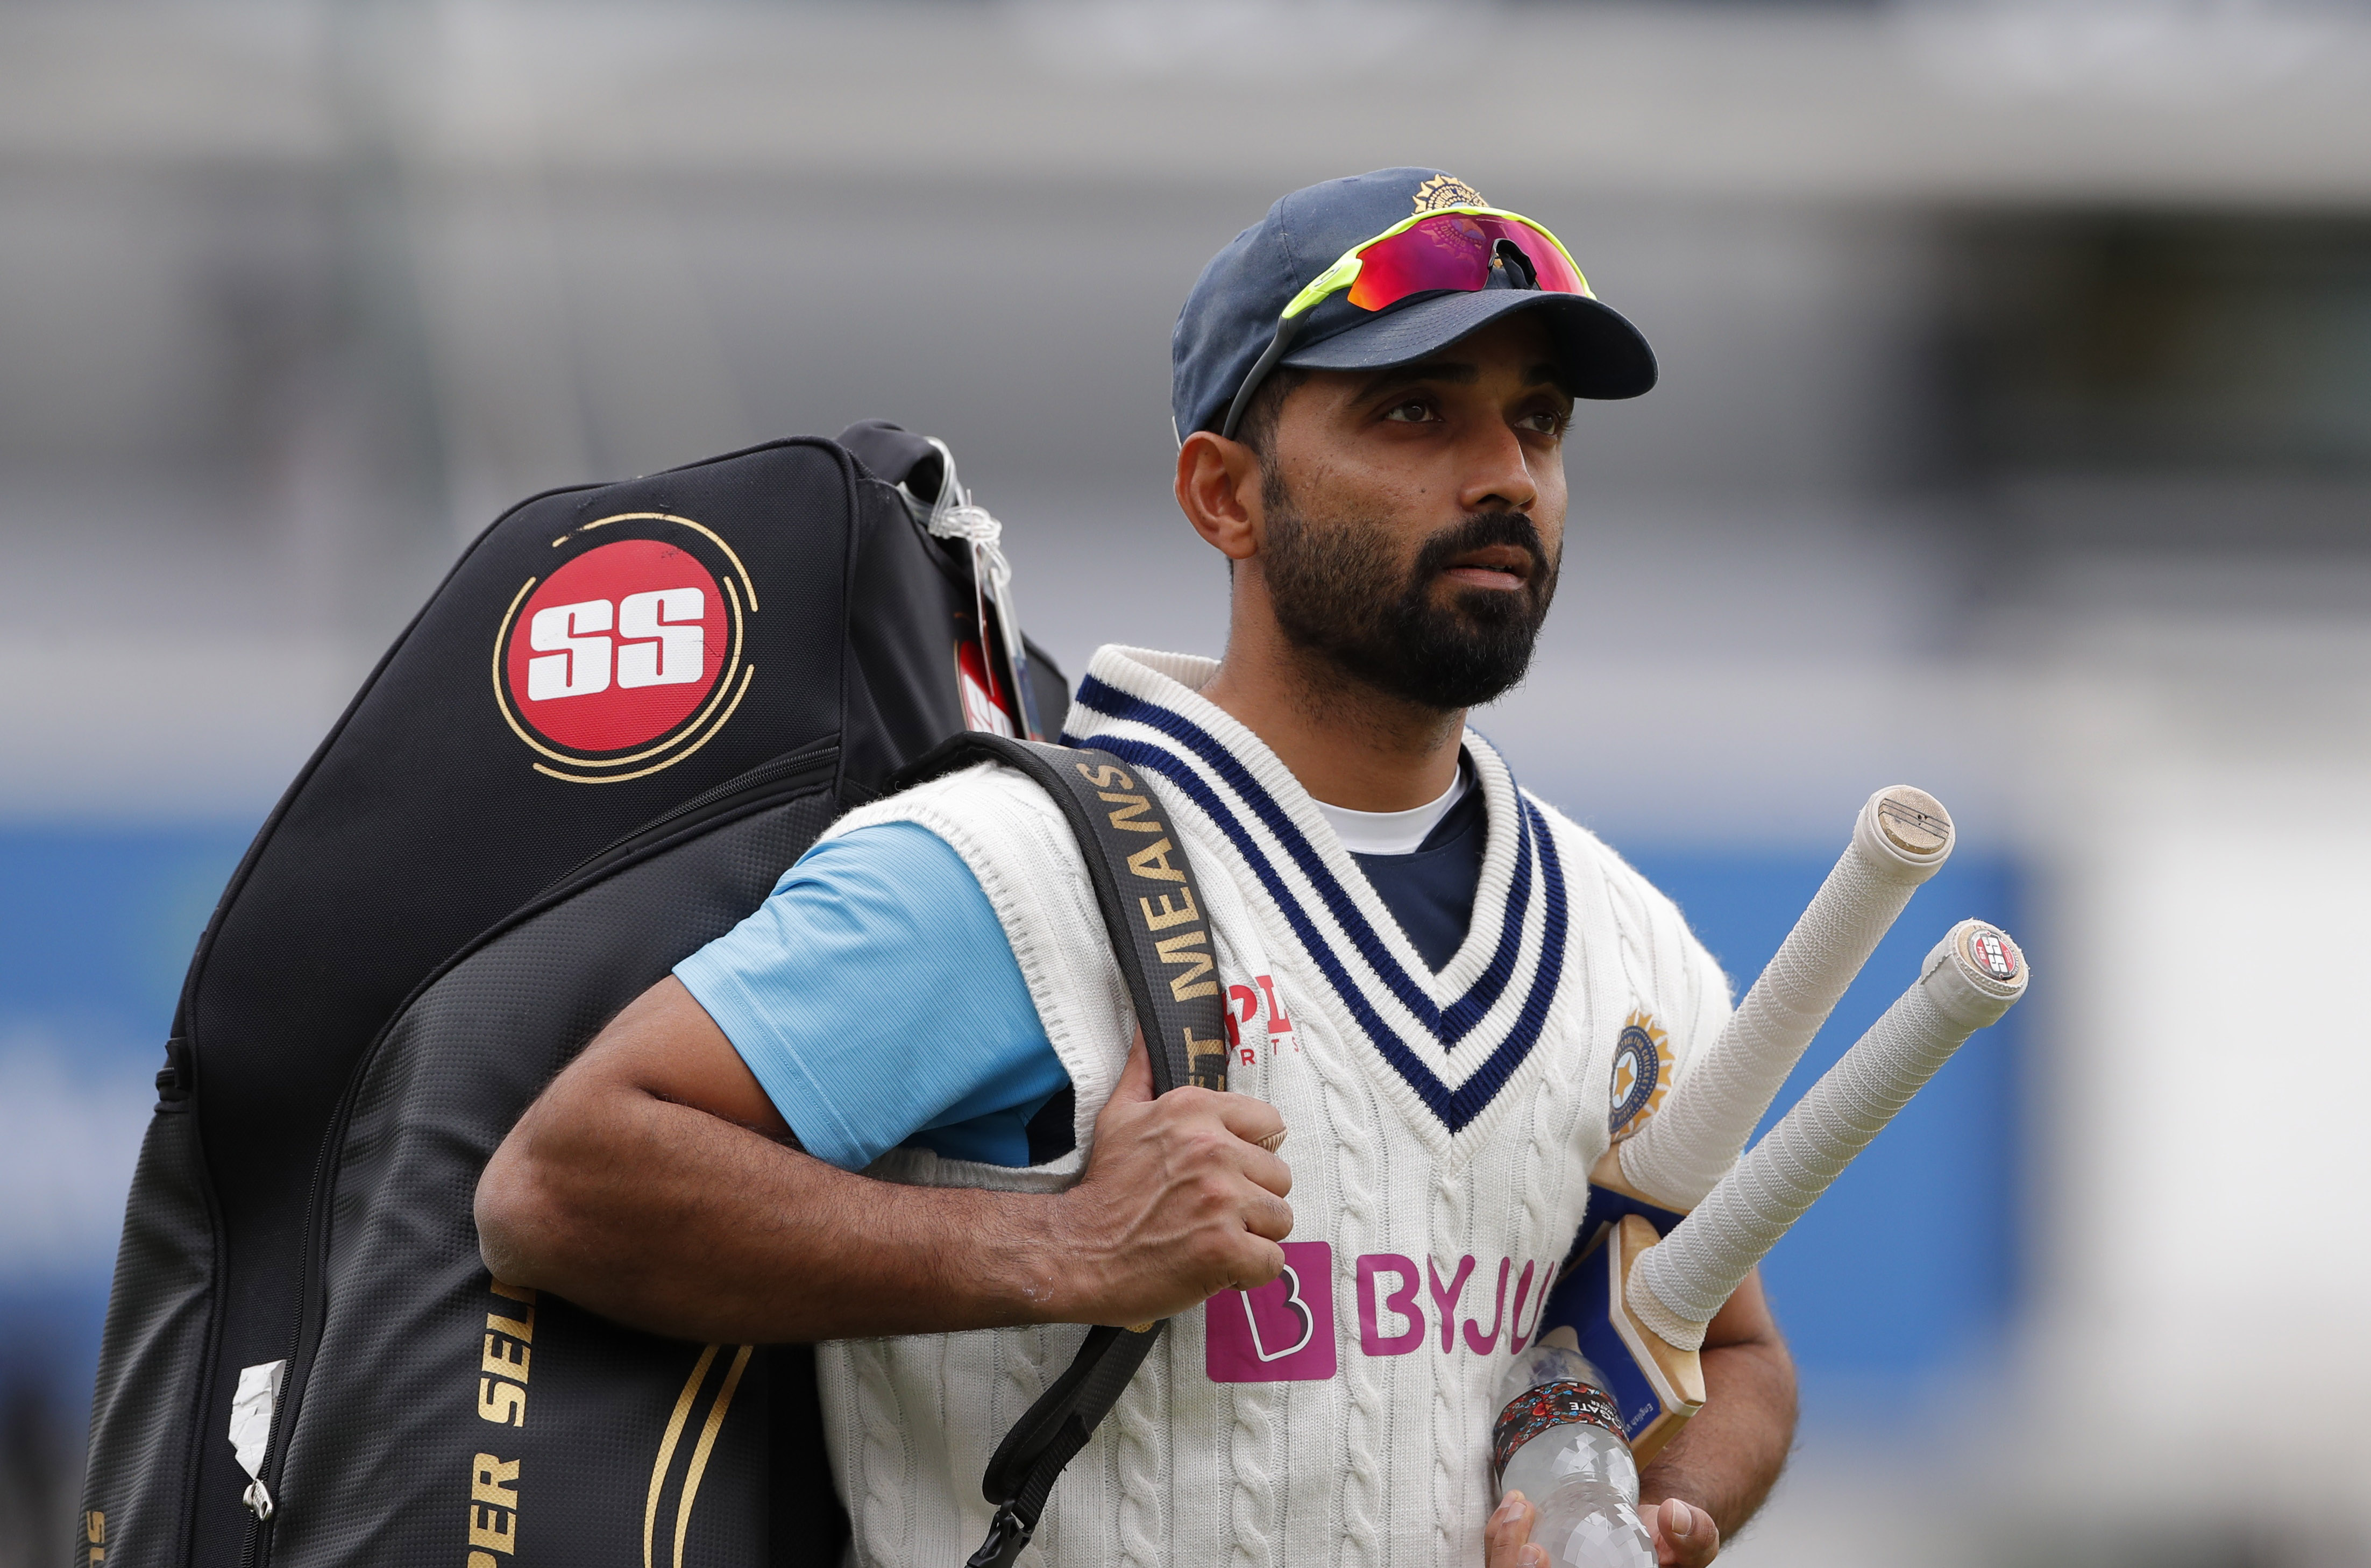 Cricket - Fourth Test - India Nets - The Oval, London, Britain - September 1, 2021 India's Ajinkya Rahane during nets. Action Images via Reuters/Andrew Couldridge